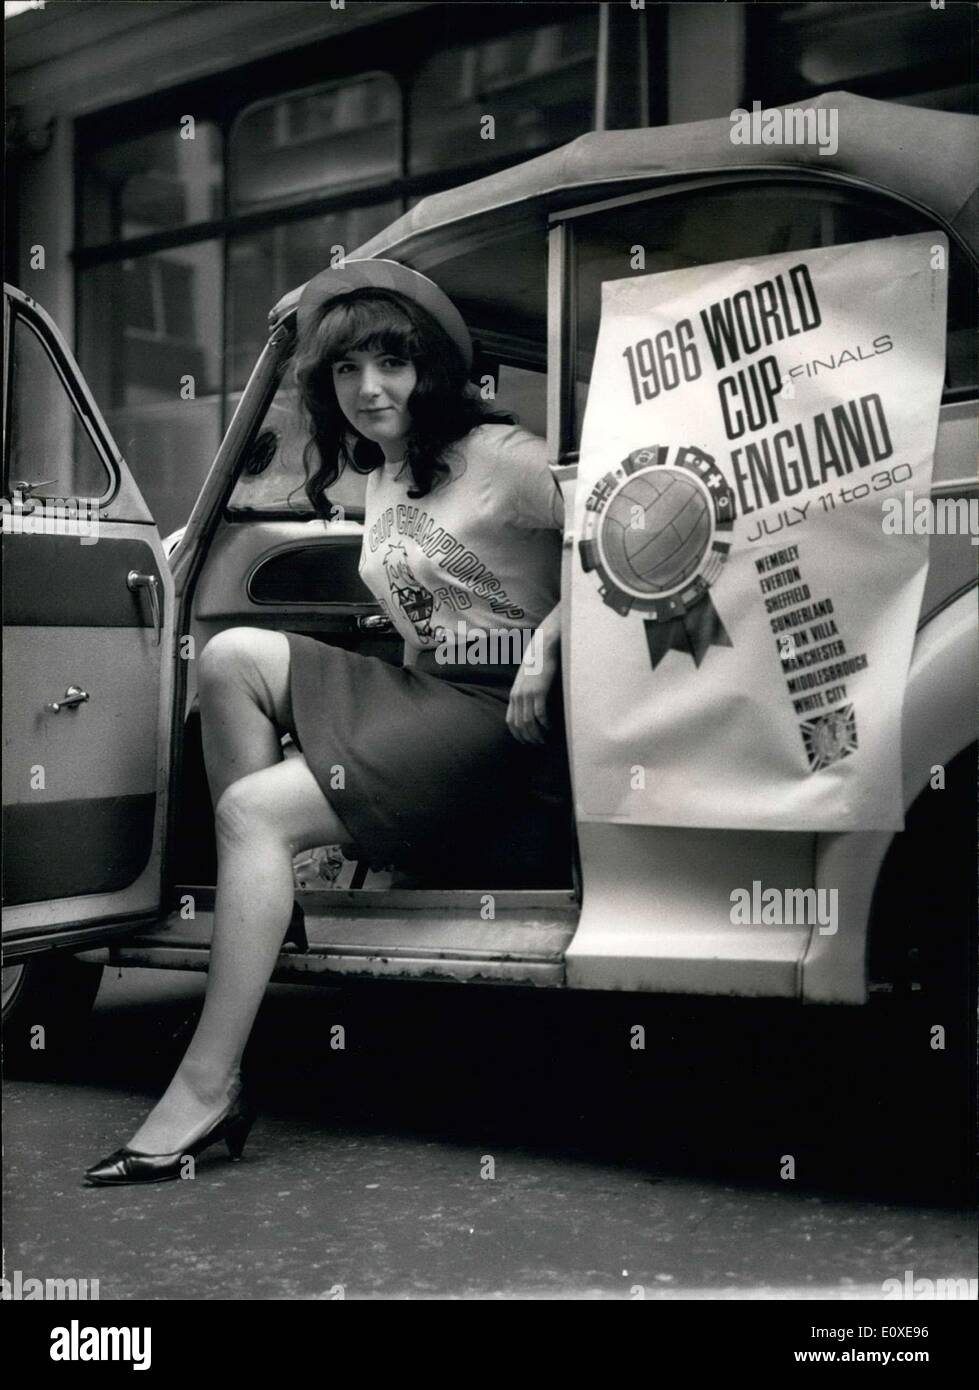 May 09, 1966 - Off to promote world cup products sales: One of the girl members of a team which set off from Holborn today, to promote sales of world cup products throughout the country. She is Sheila Hammons, 20, of Chiswick. Stock Photo